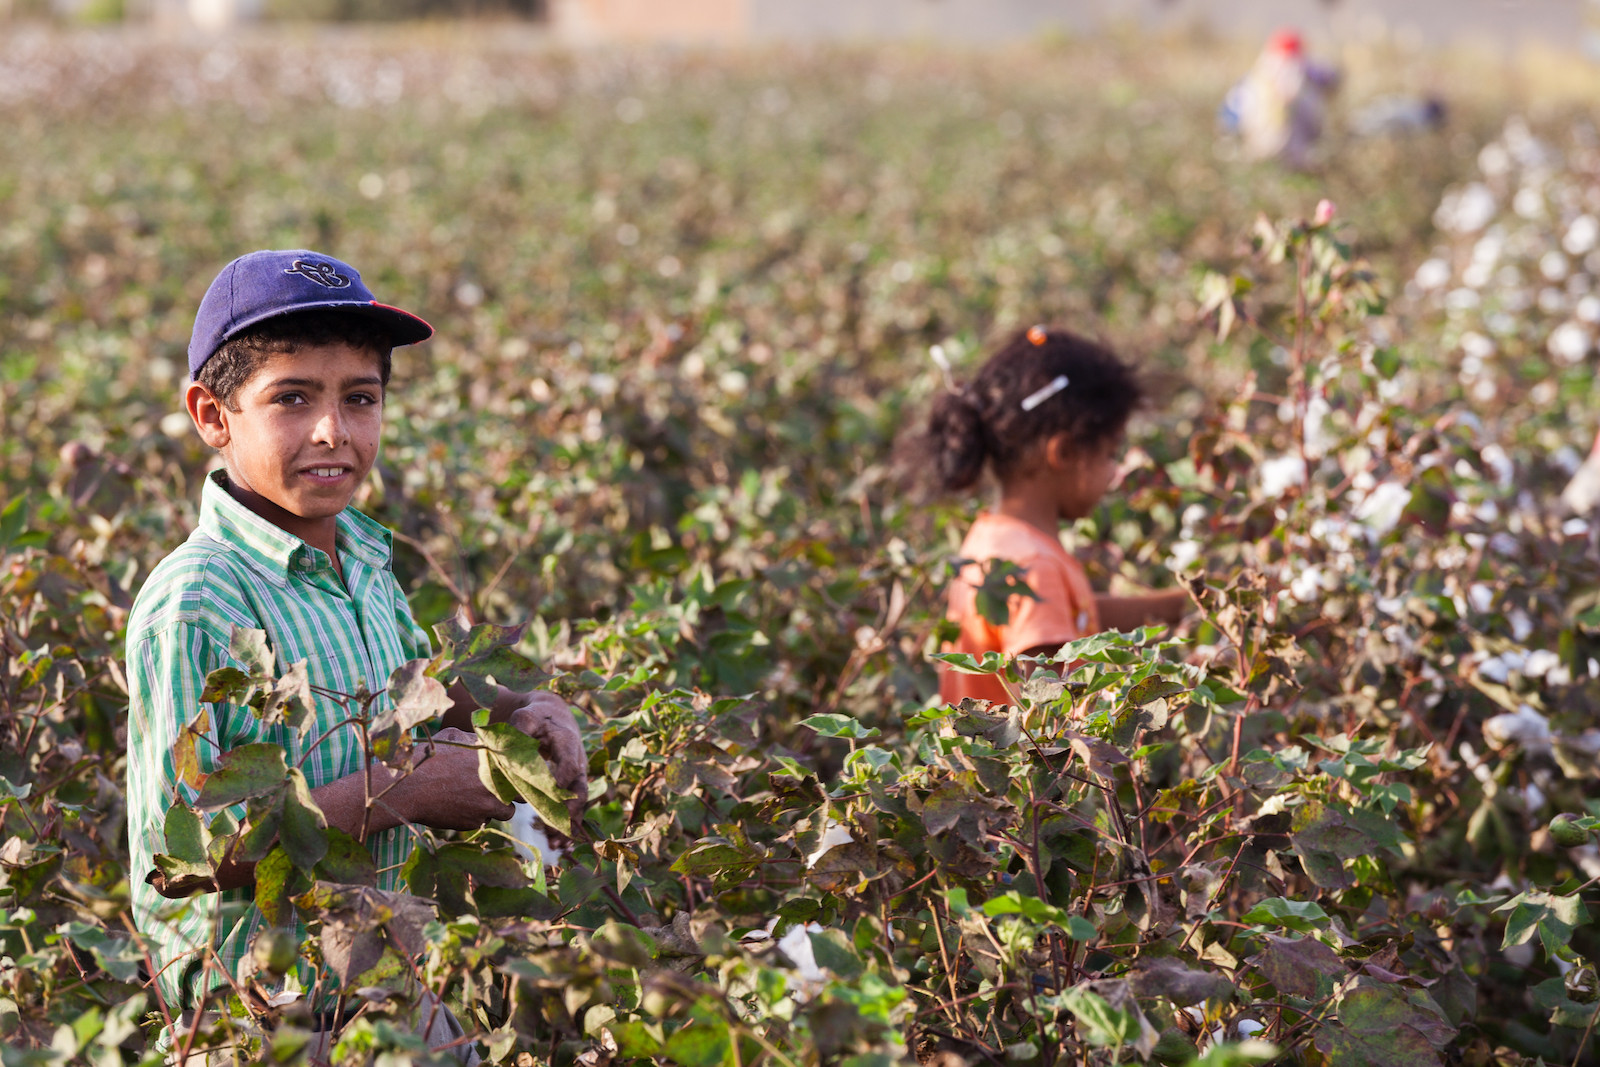 Child Labor In Fashion Industry
 How We Can Tackle Child Labor and Modern Day Slavery in